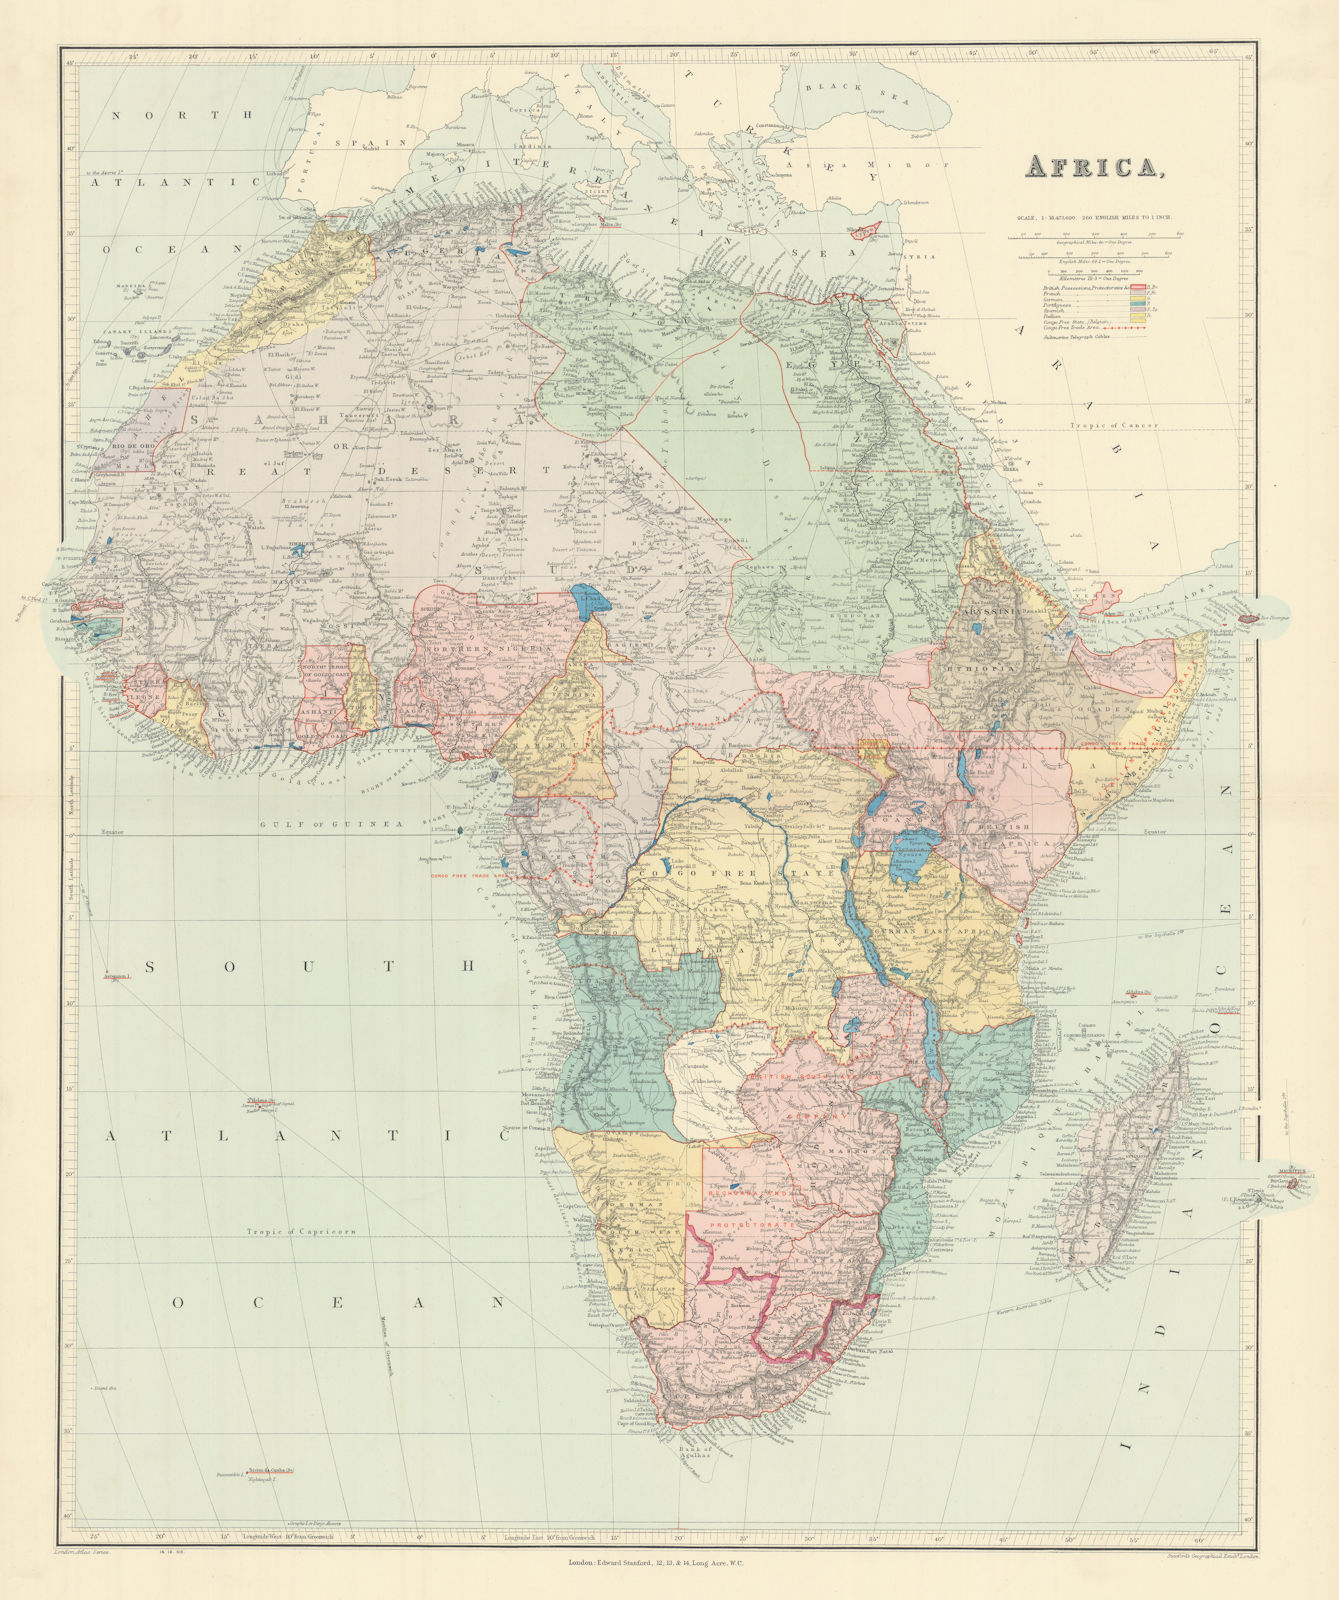 Africa. Congo Free Trade Area. British South Africa Company. STANFORD 1904 map